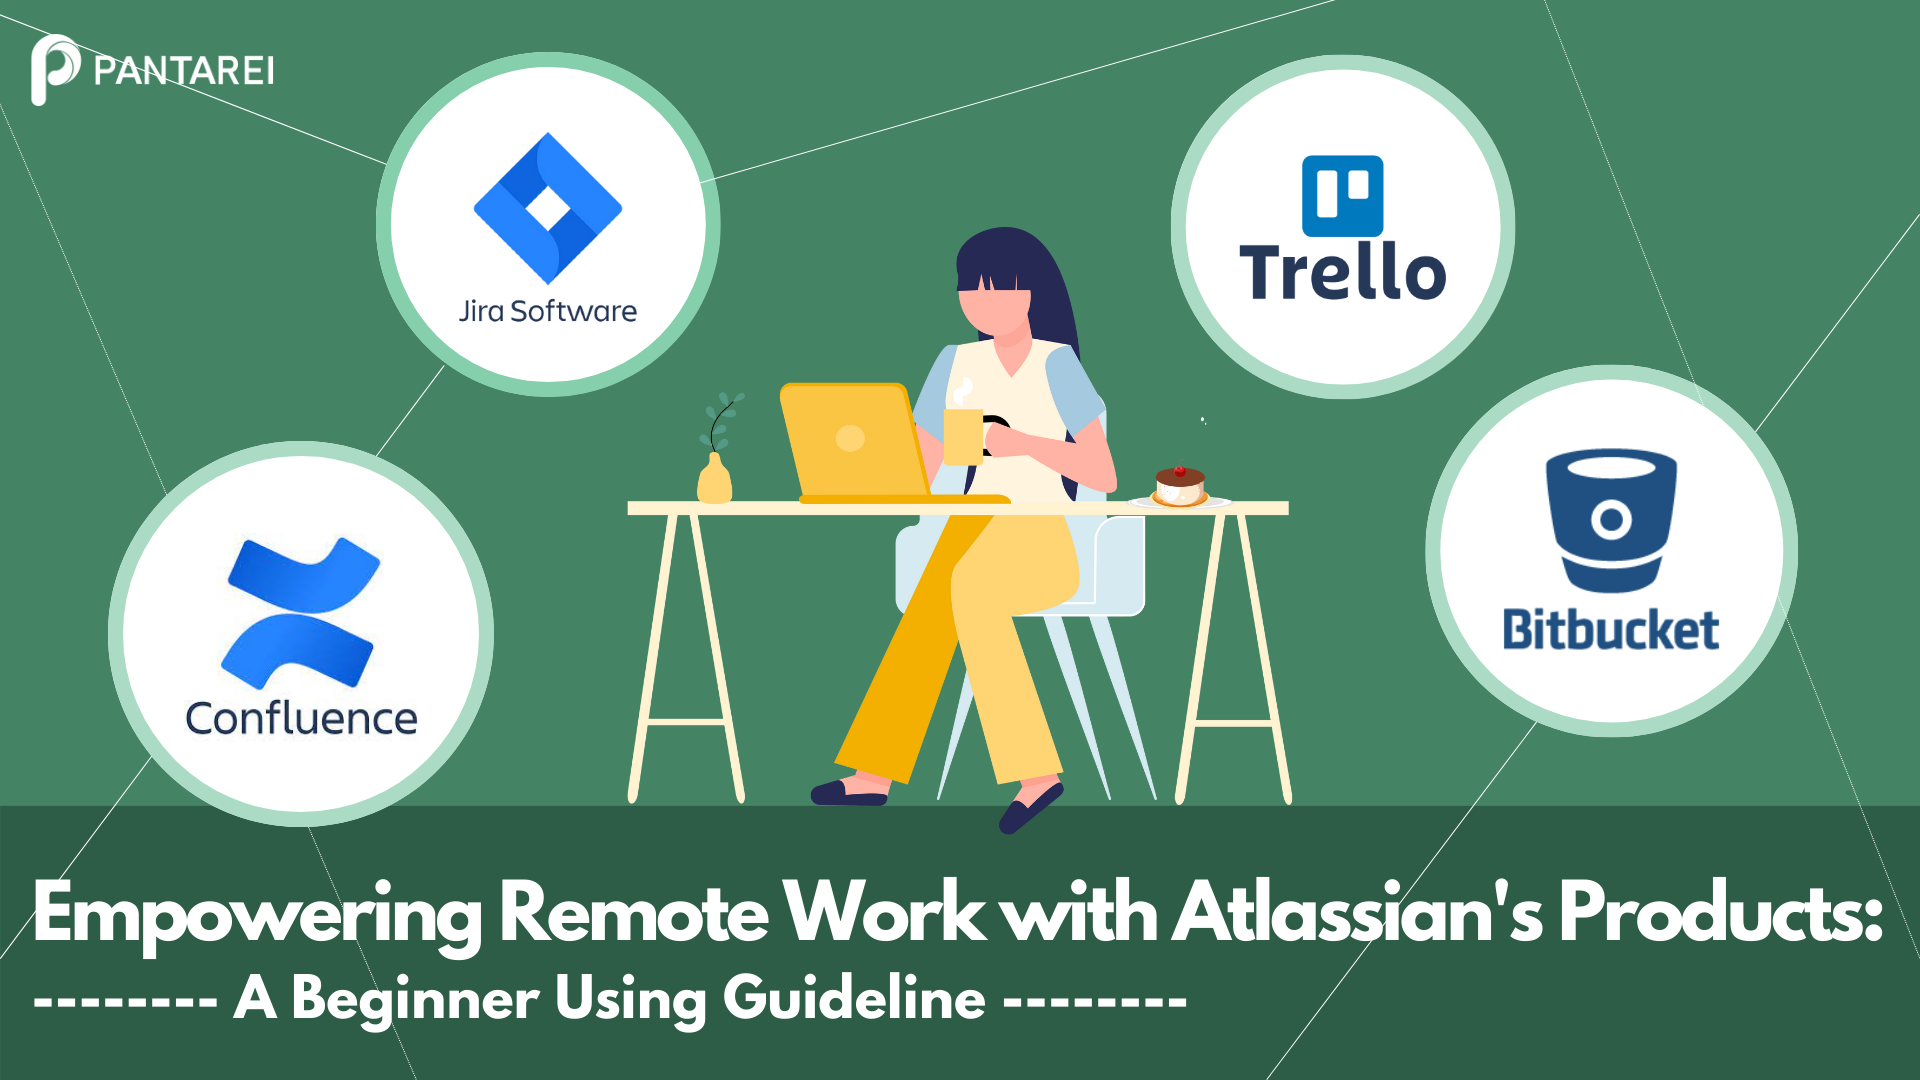 Thumbnial for "Empowering Remote Work with Atlassian's Products: A Beginner Using Guideline"